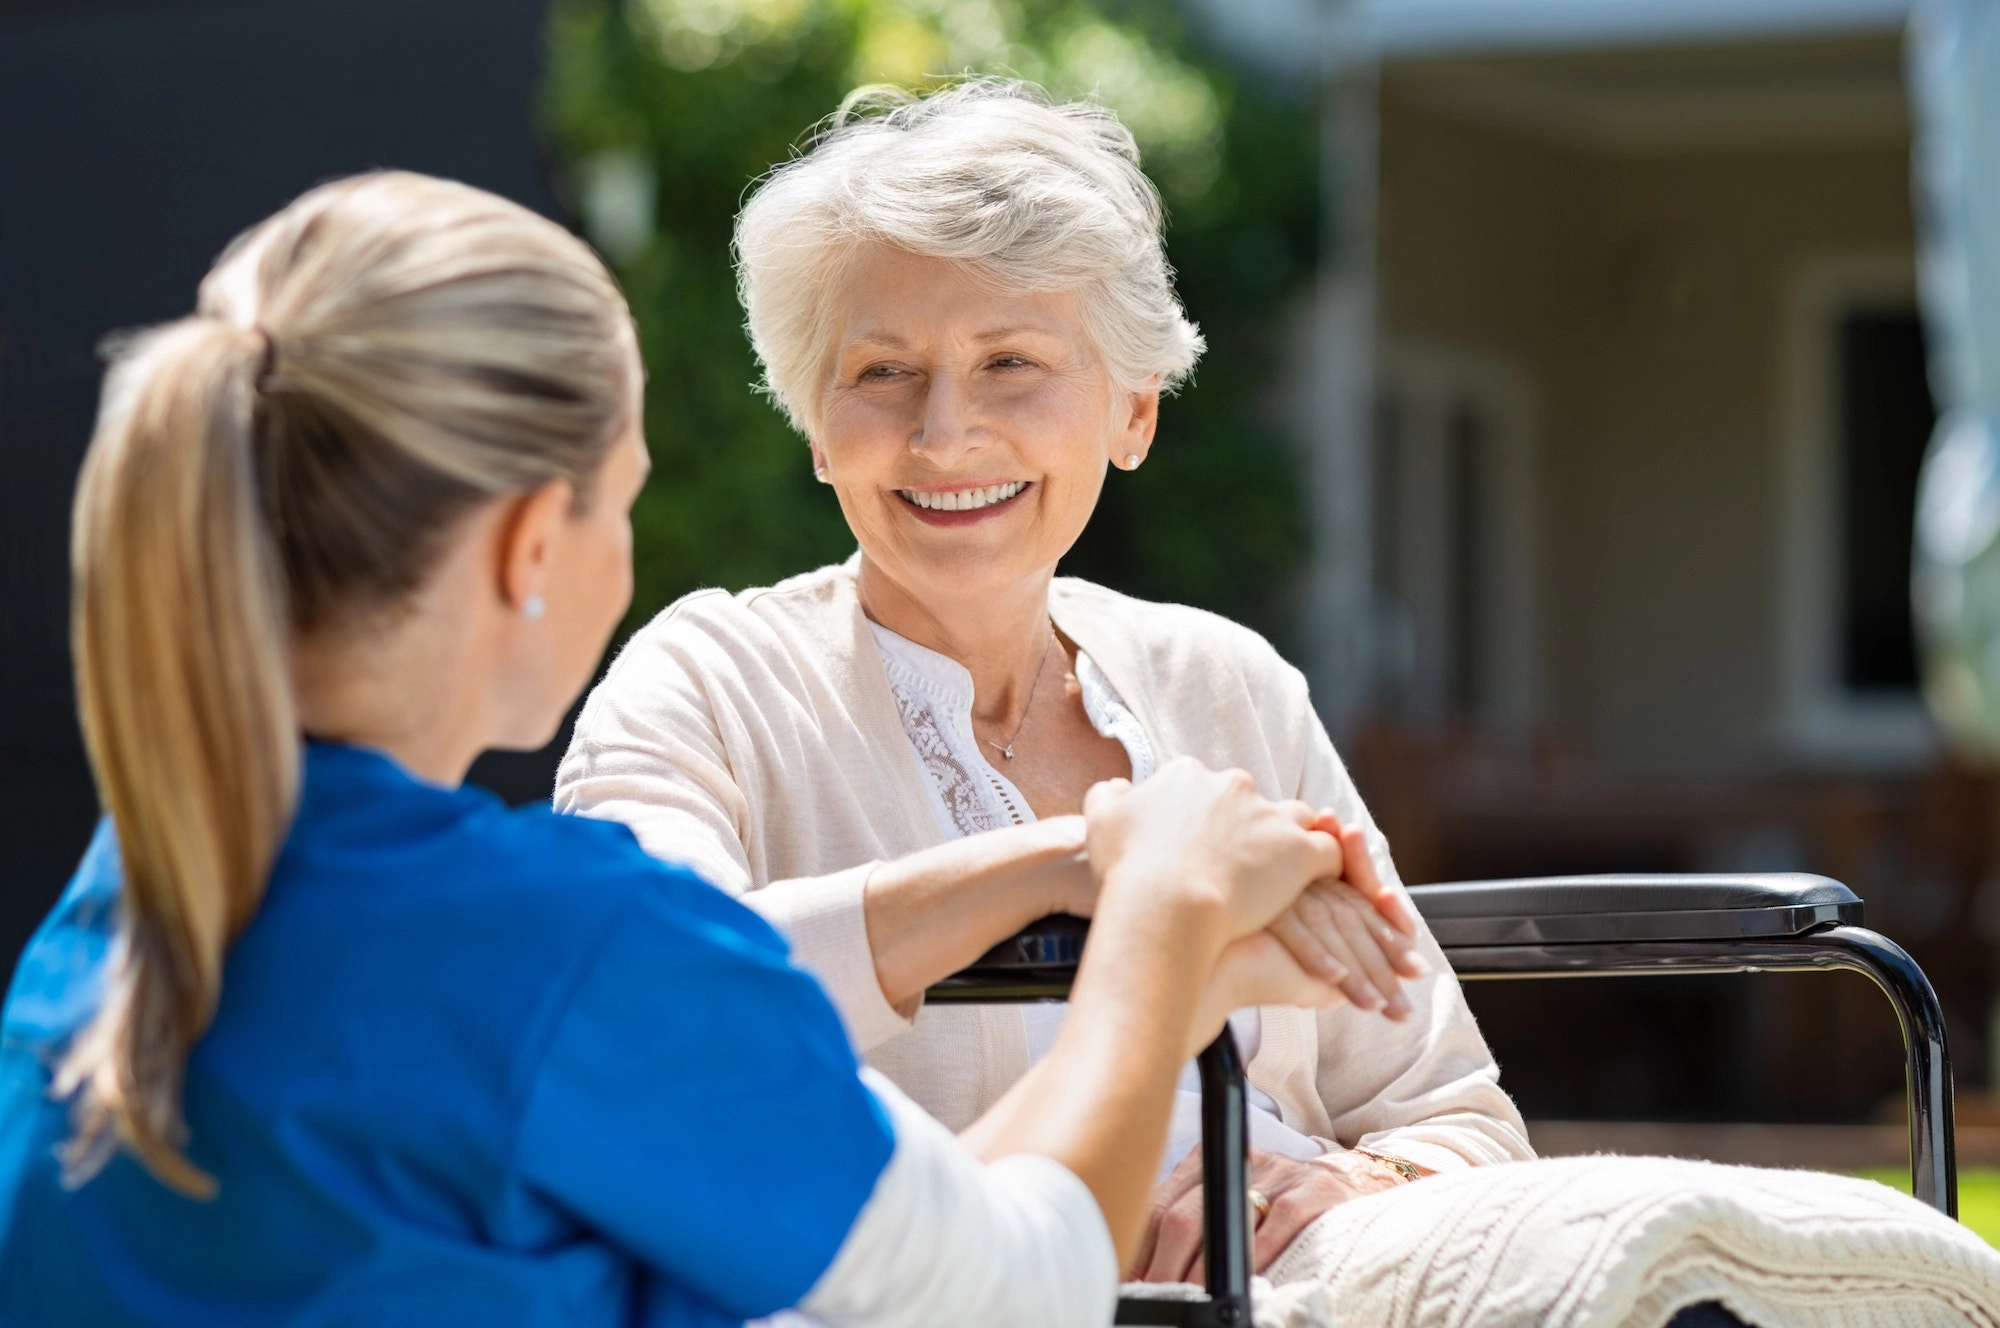 Hospice Medical Care & Personal Care Services in Arizona